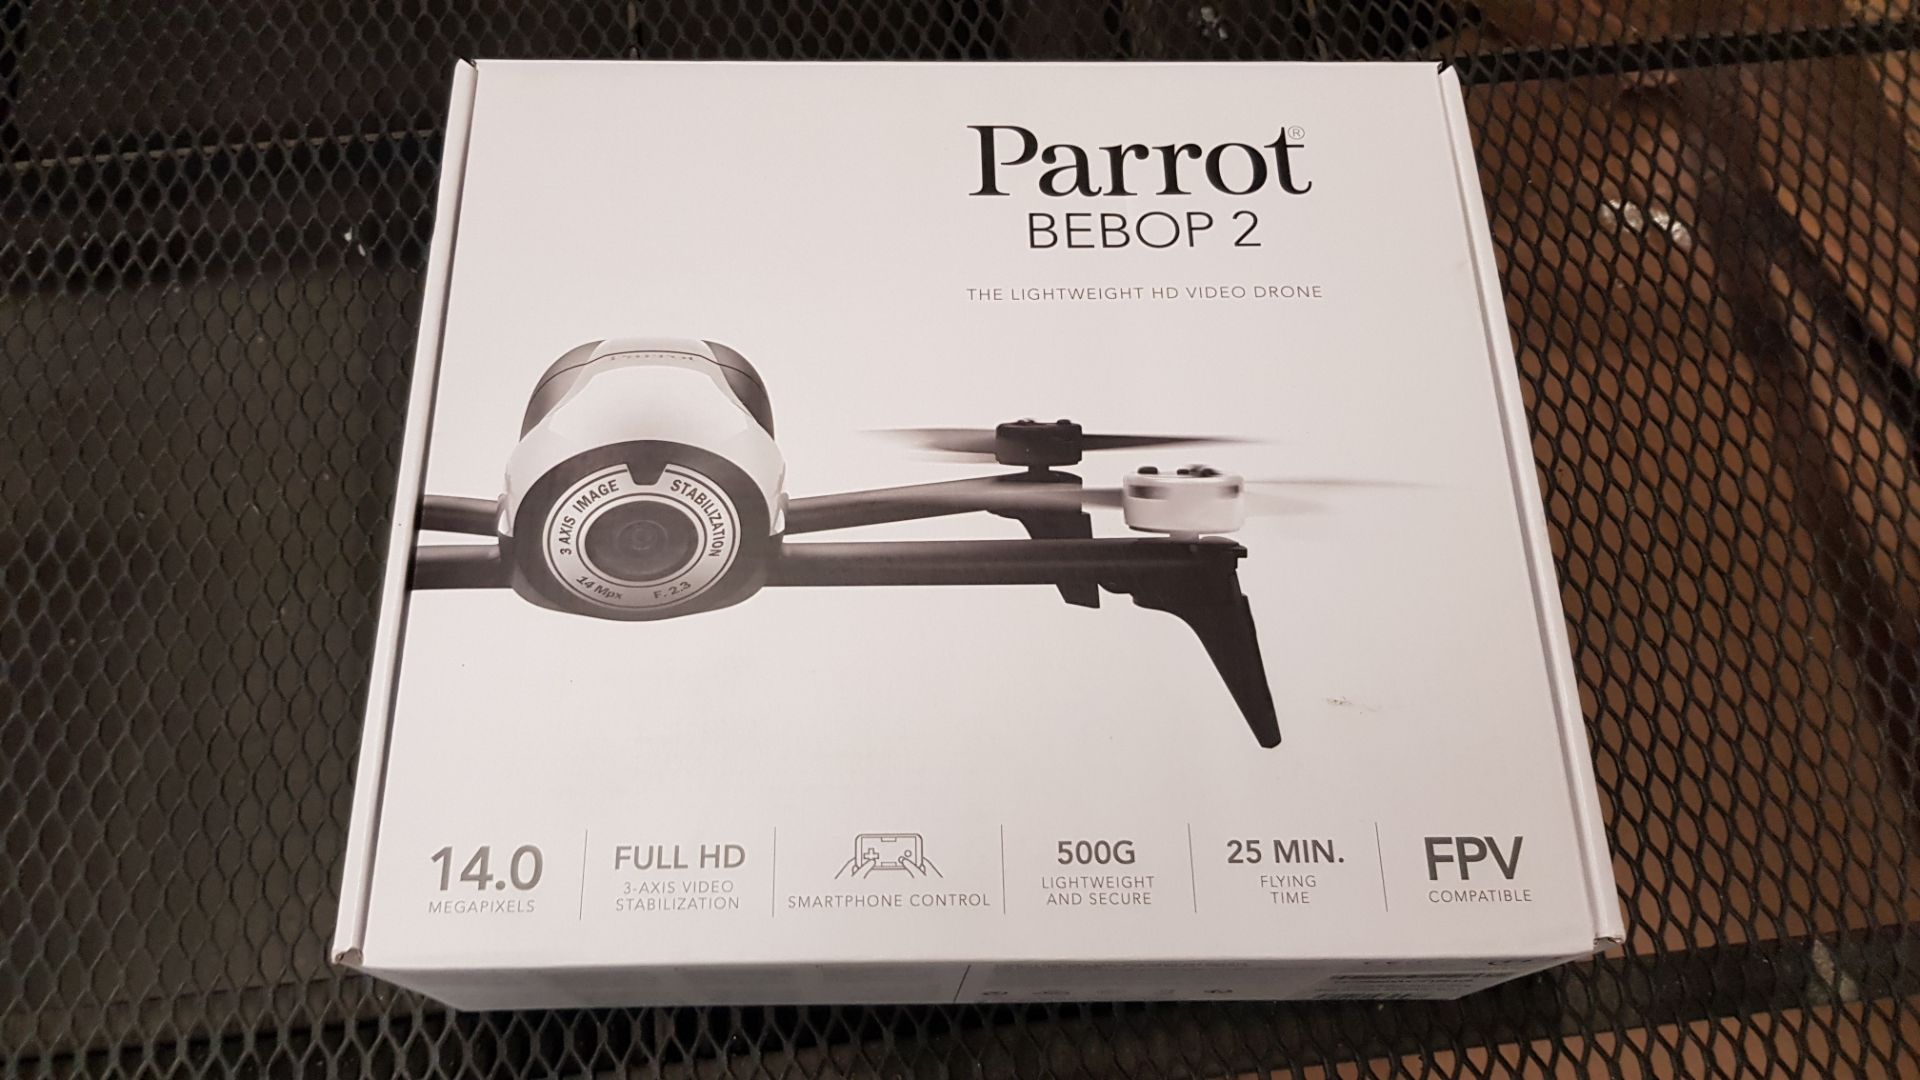 (R8) RRP £599.99. Parrot Bebop 2 FPV Compact HD Video Drone. 25 Mins Flying Time. 3-Axis Stabilizat - Image 11 of 14